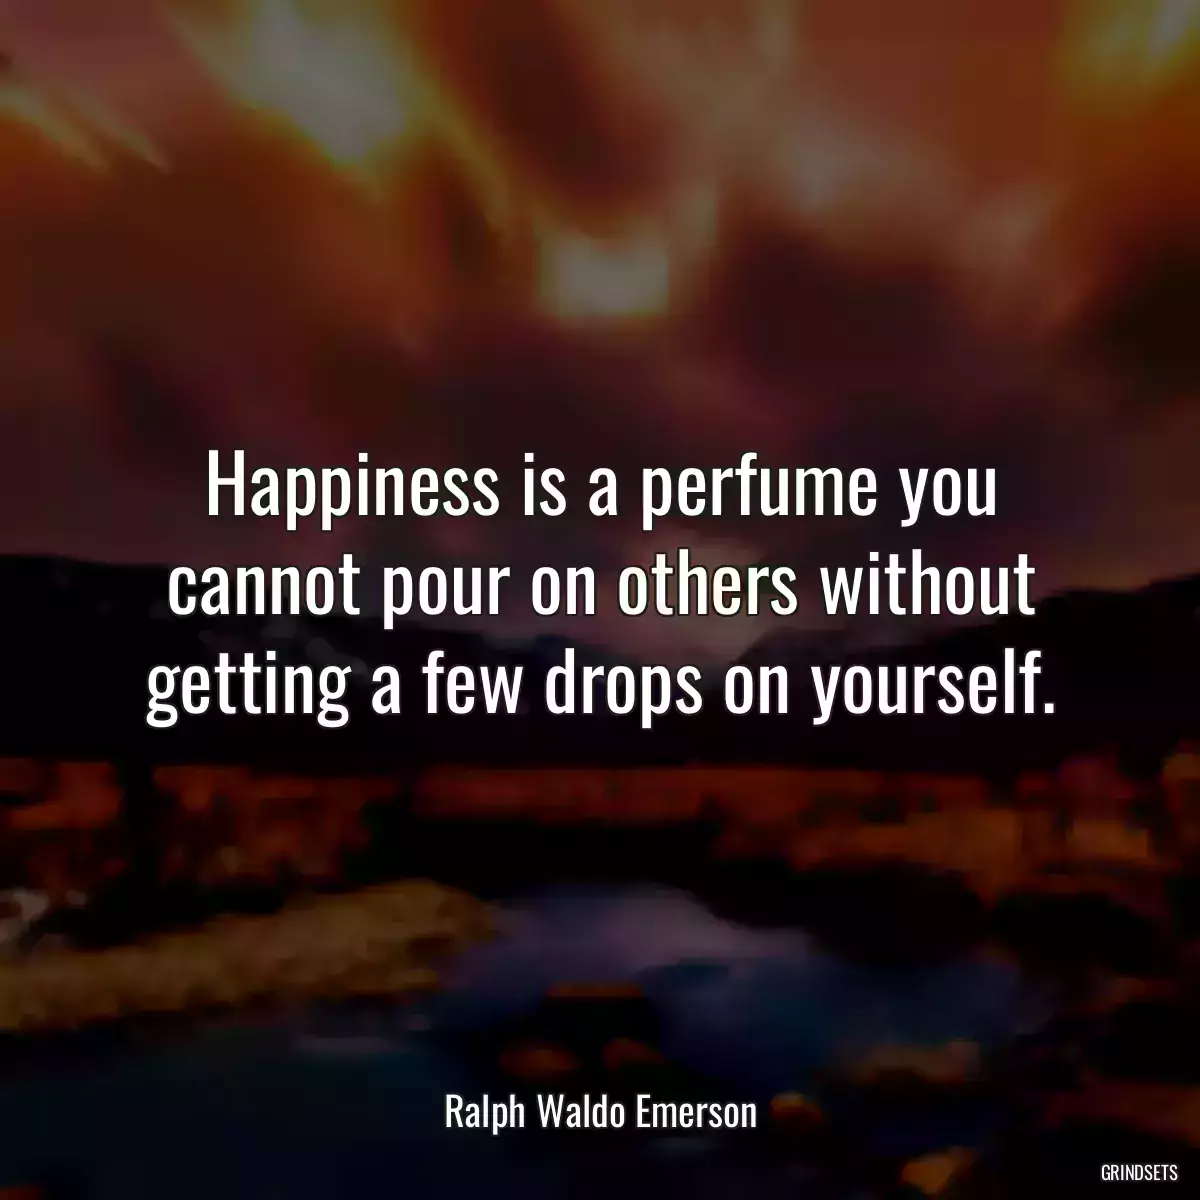 Happiness is a perfume you cannot pour on others without getting a few drops on yourself.